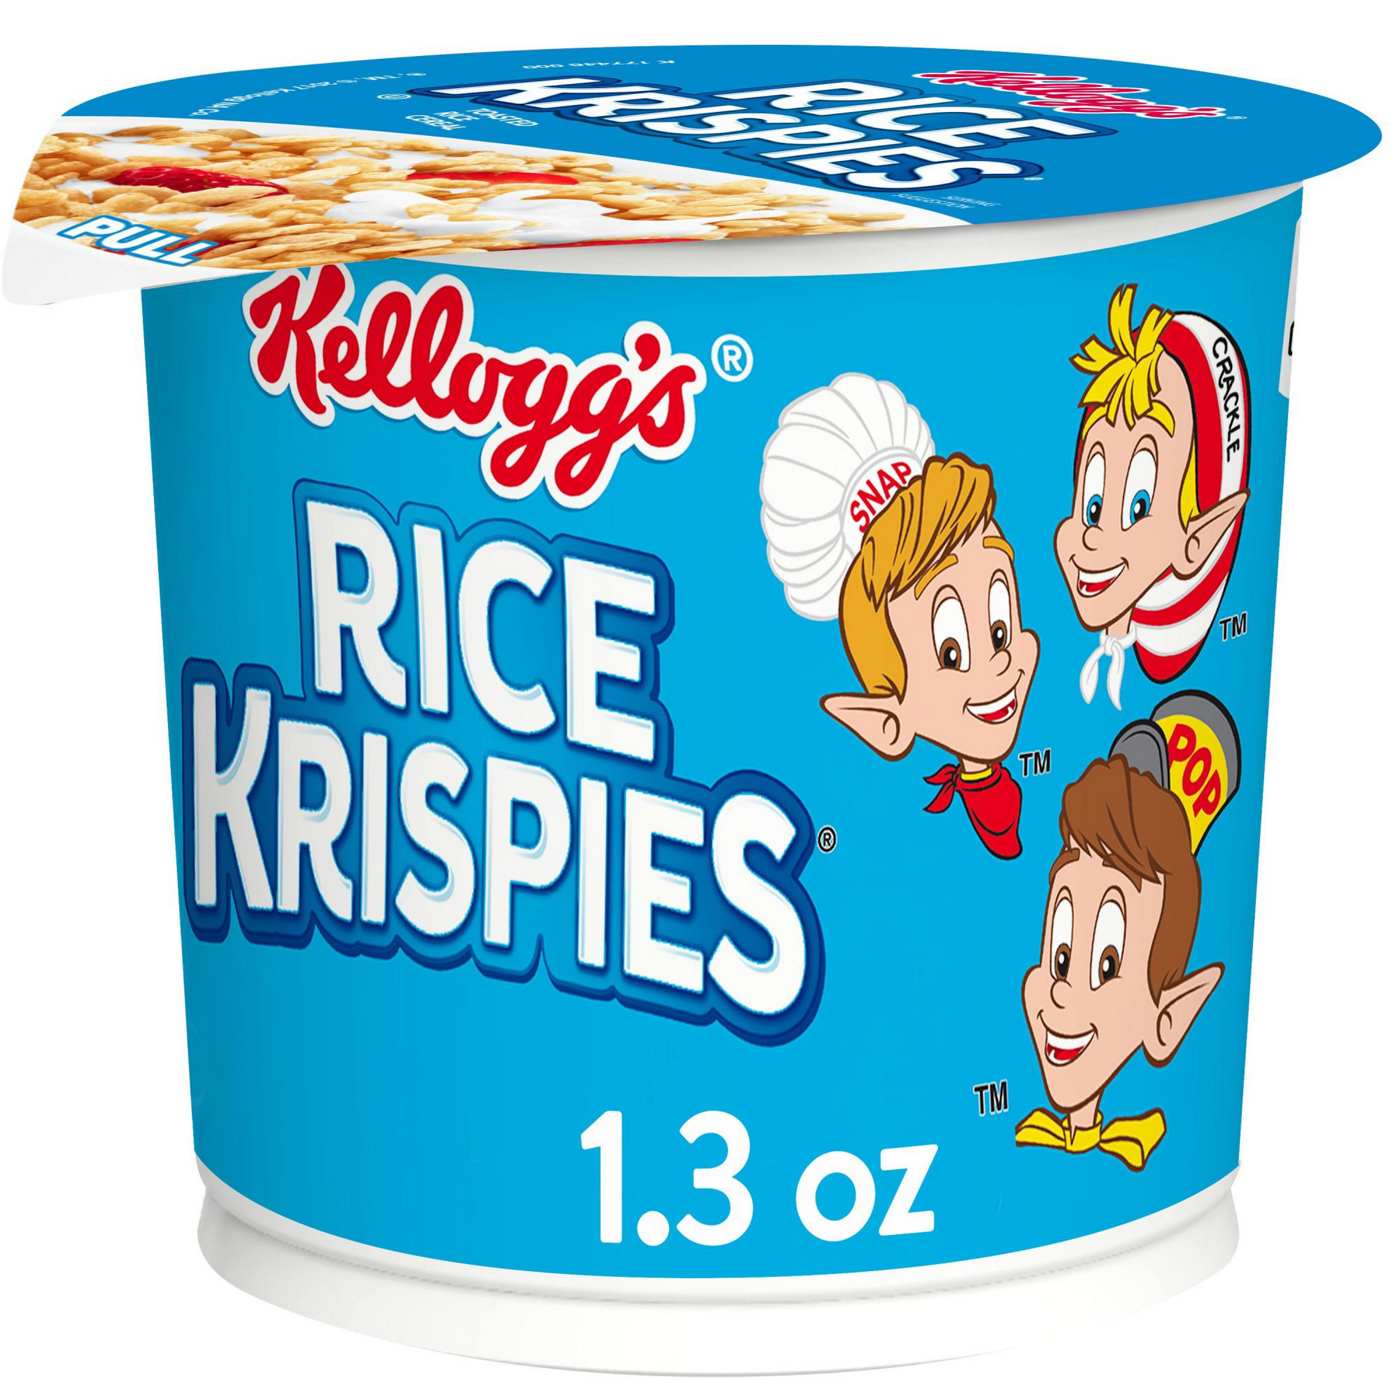 Kellogg's Rice Krispies Cereal Cup; image 1 of 5